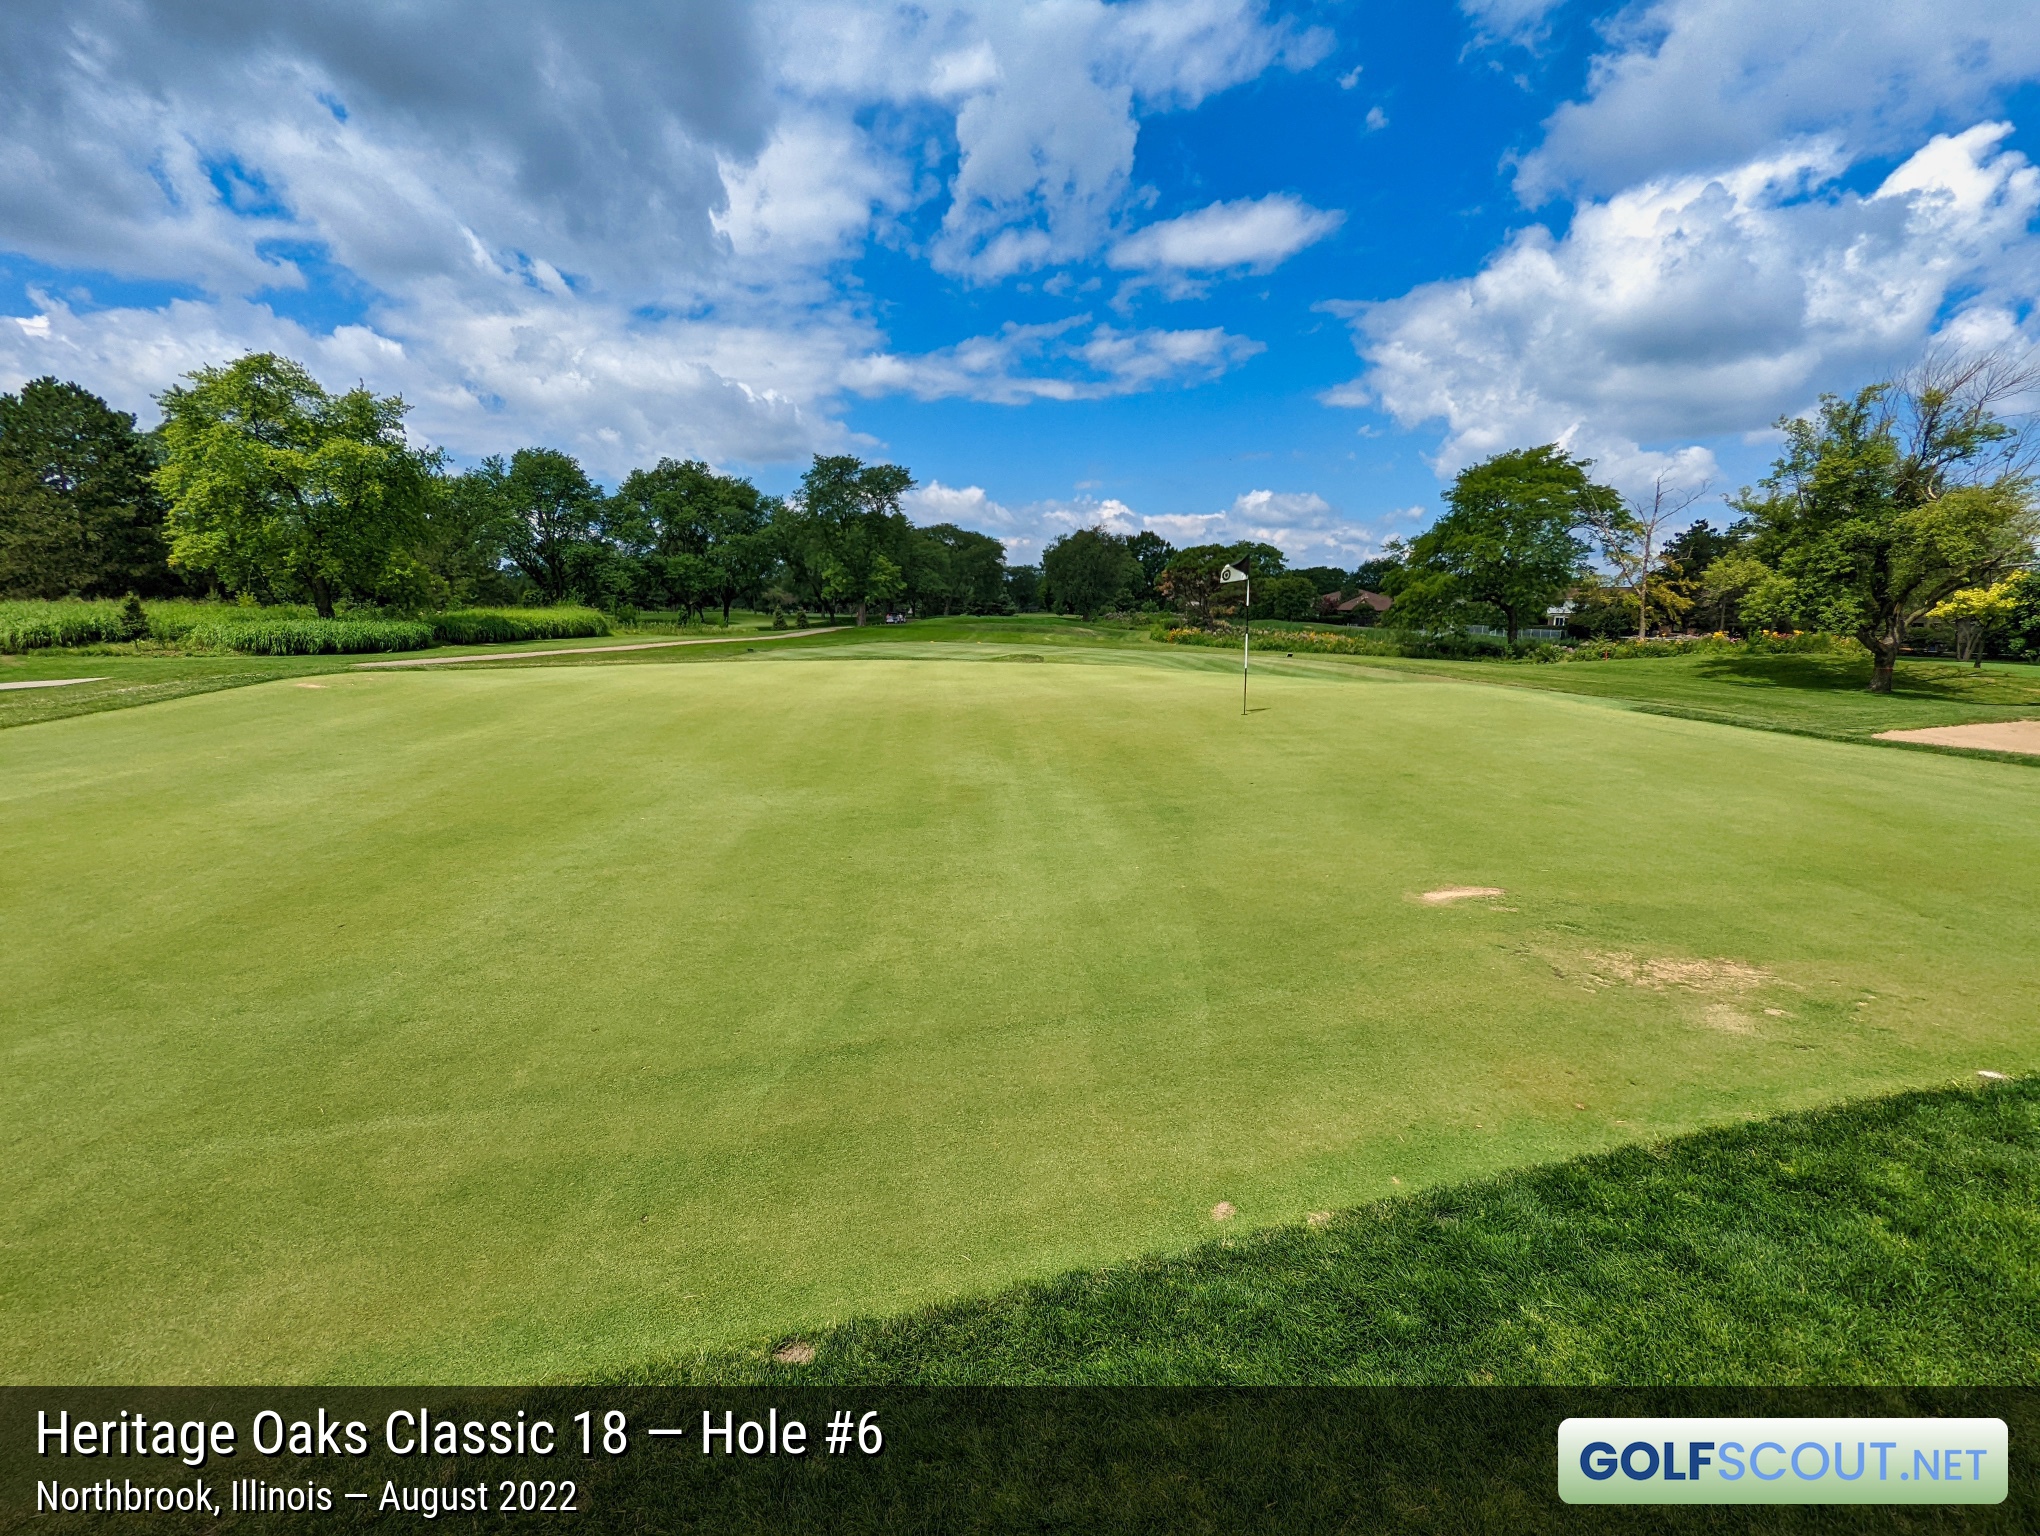 Photo of hole #6 at Heritage Oaks Golf Club - Classic 18 in Northbrook, Illinois. 